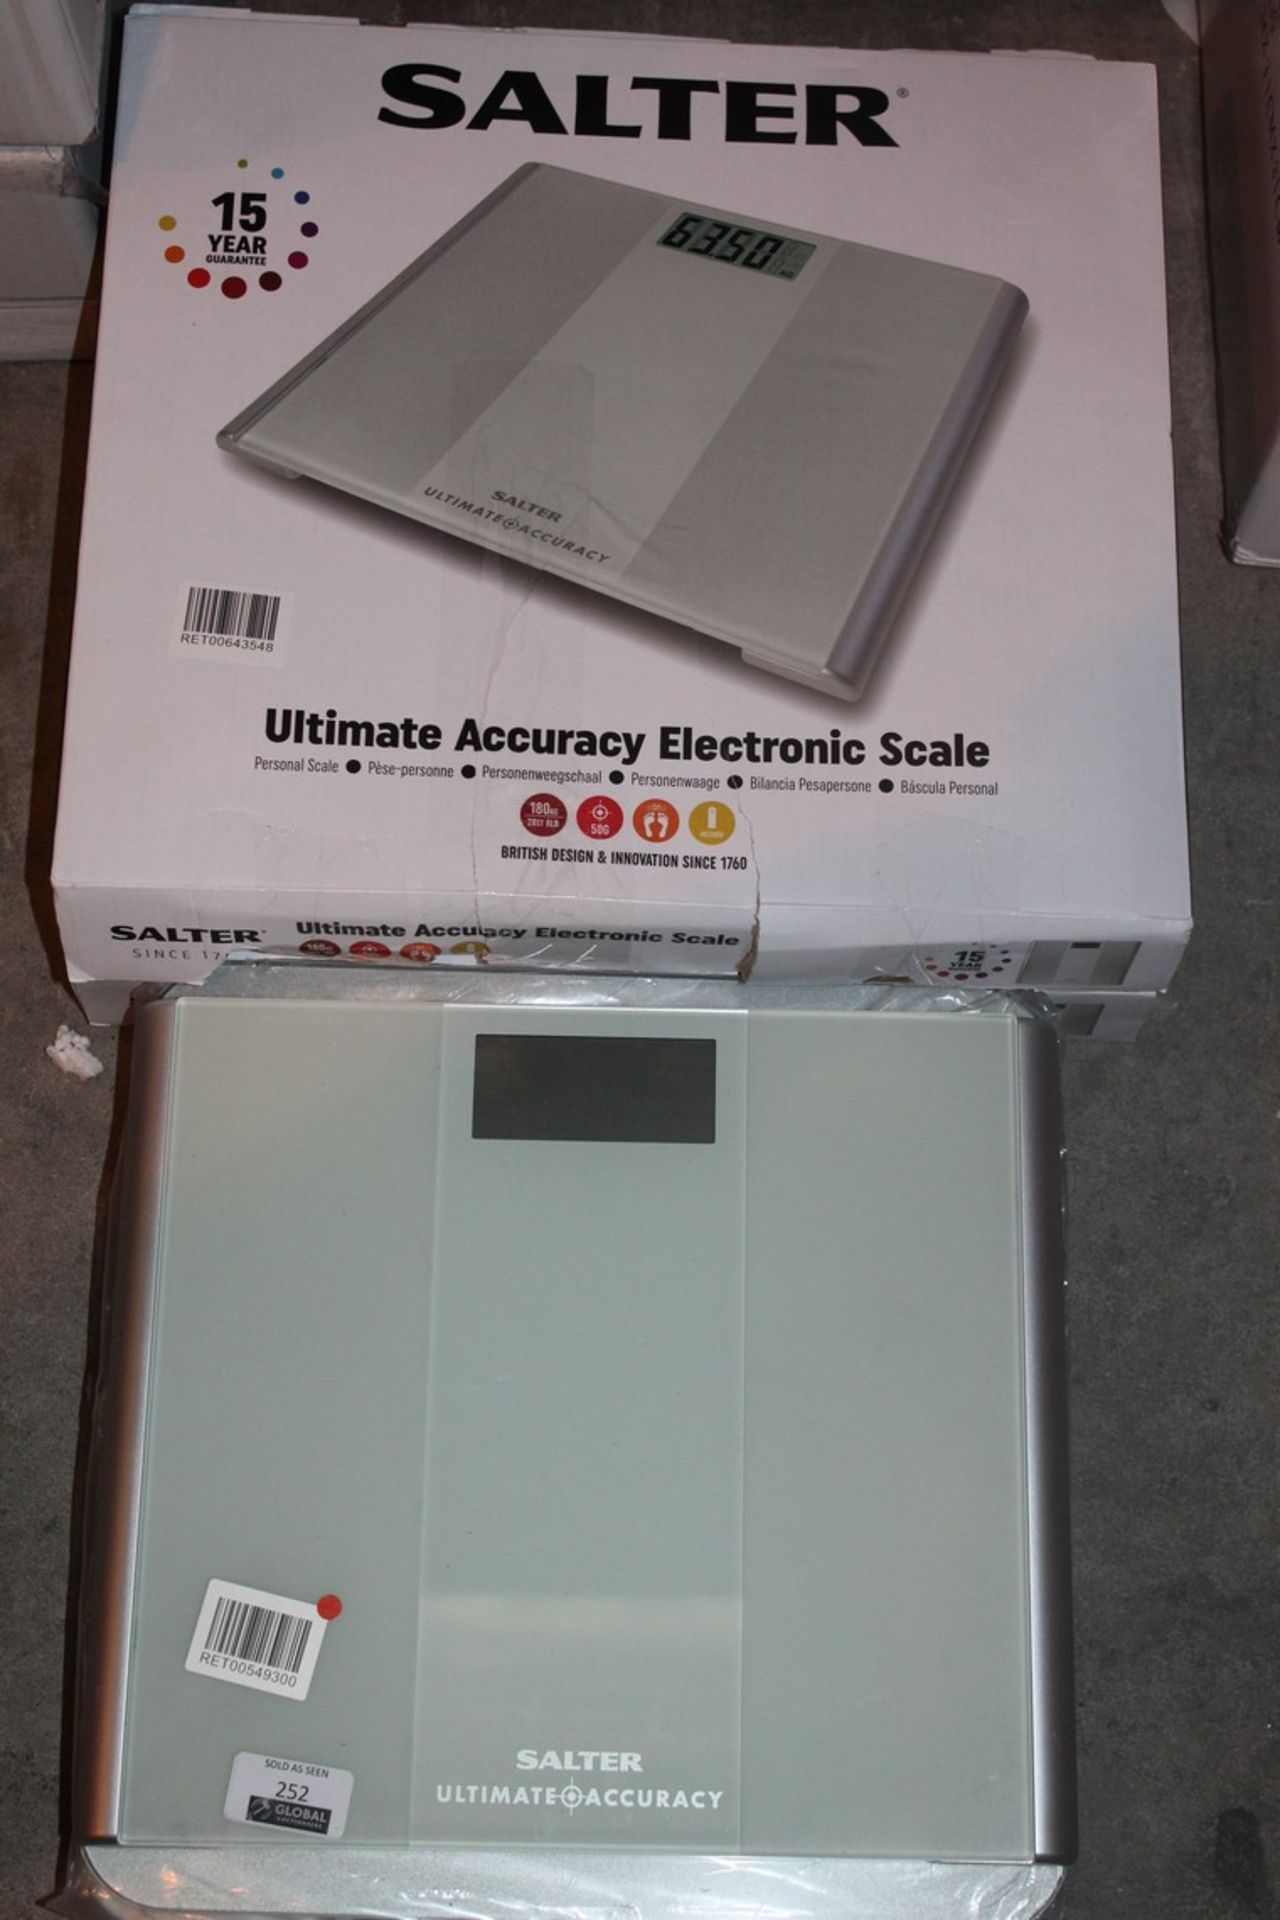 Lot To Contain 4 Boxed And Unboxed Salter Weighing Scales Combined RRP £120 (RET00643548) (